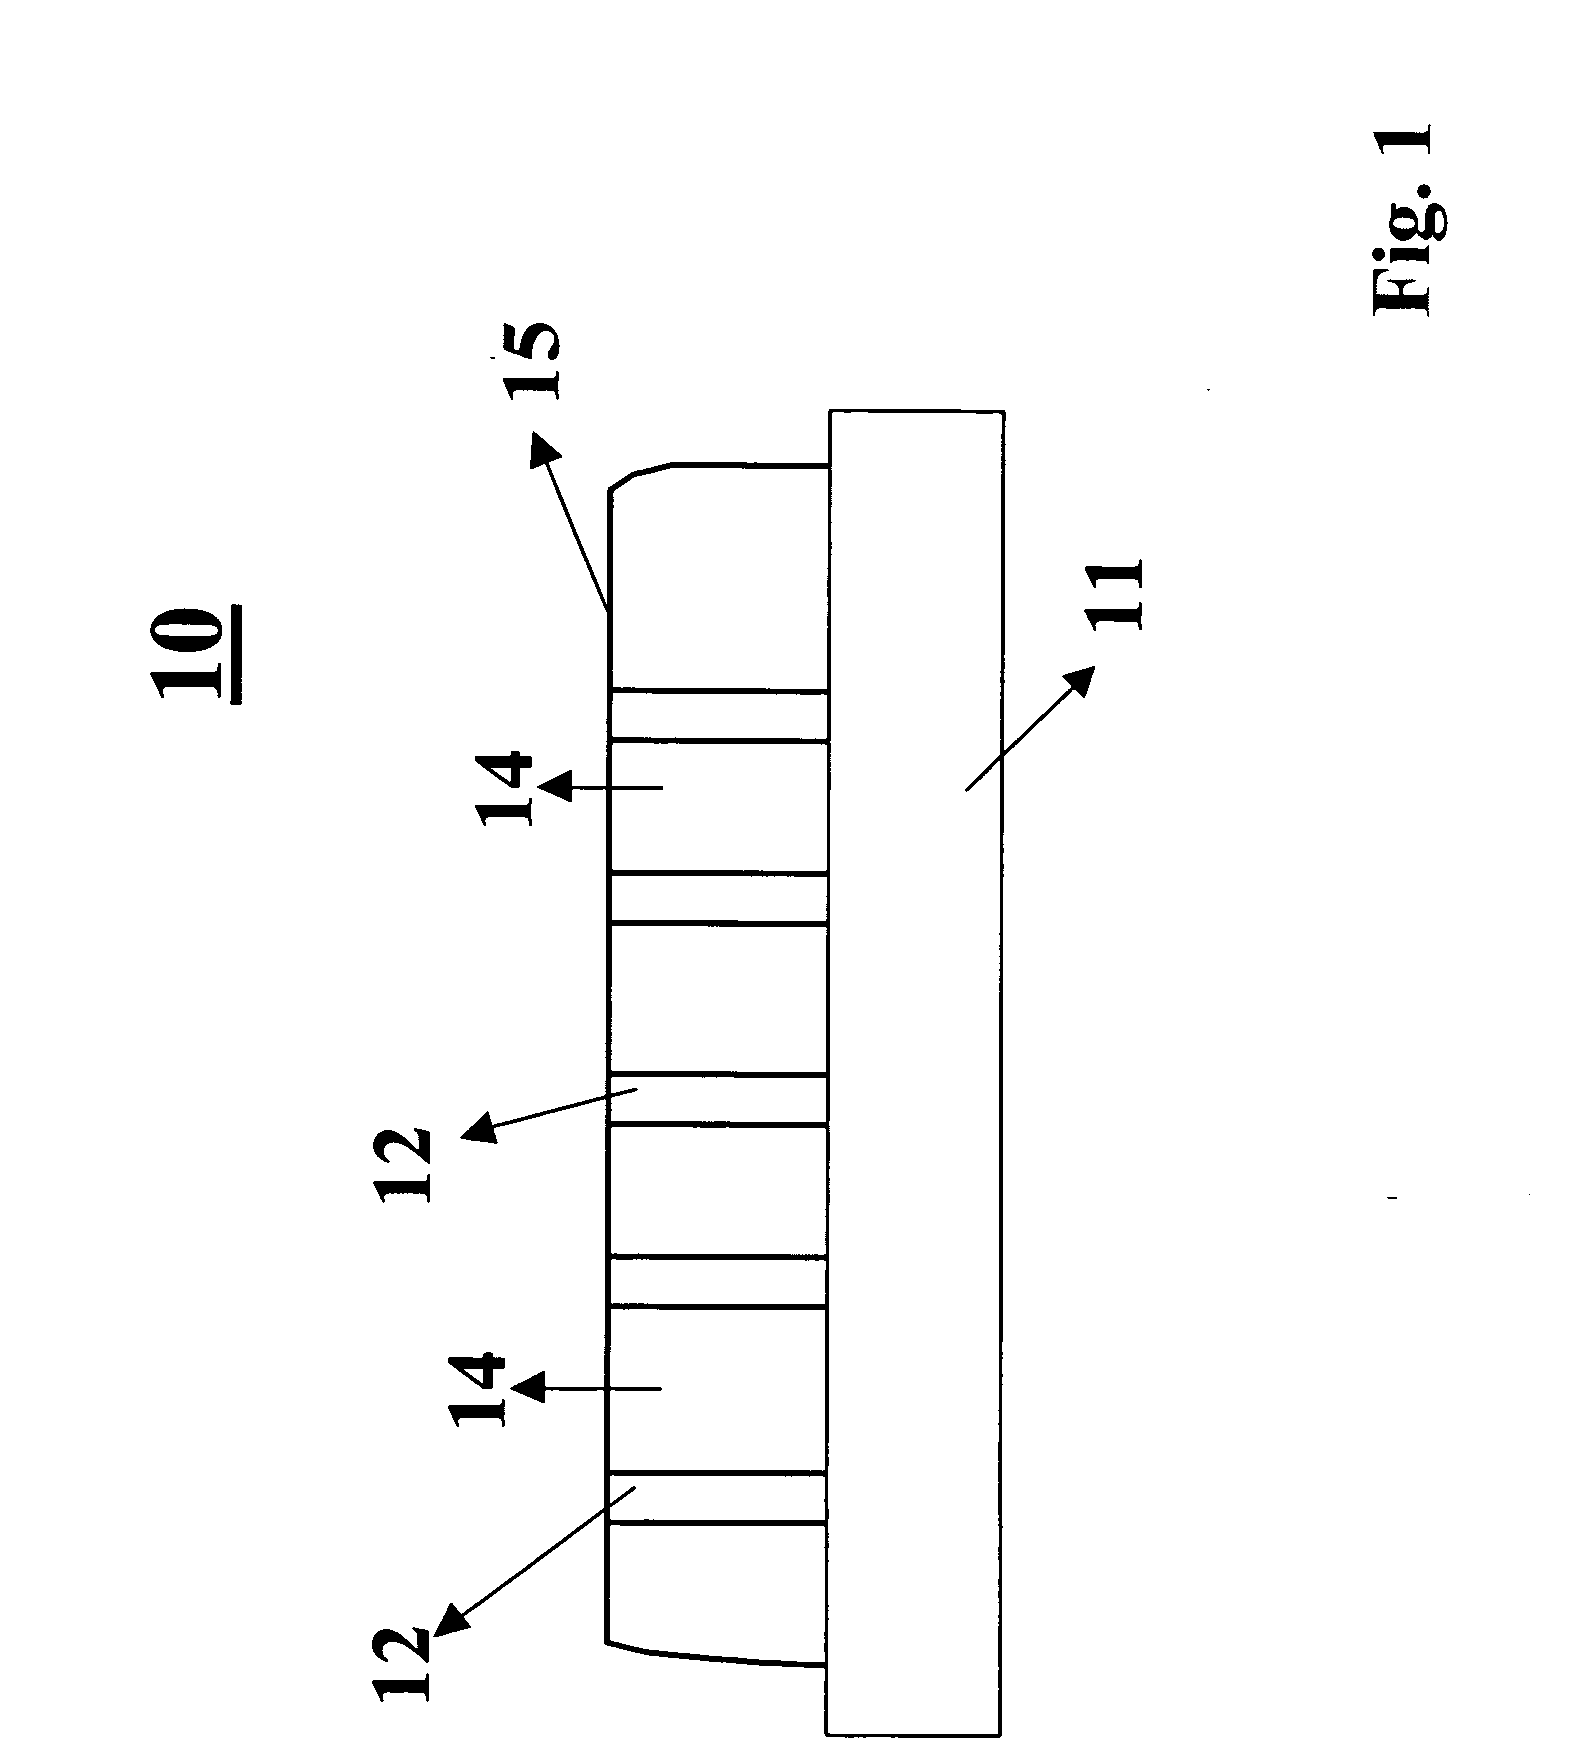 Ultra-high-density magnetic recording media and methods for making the same